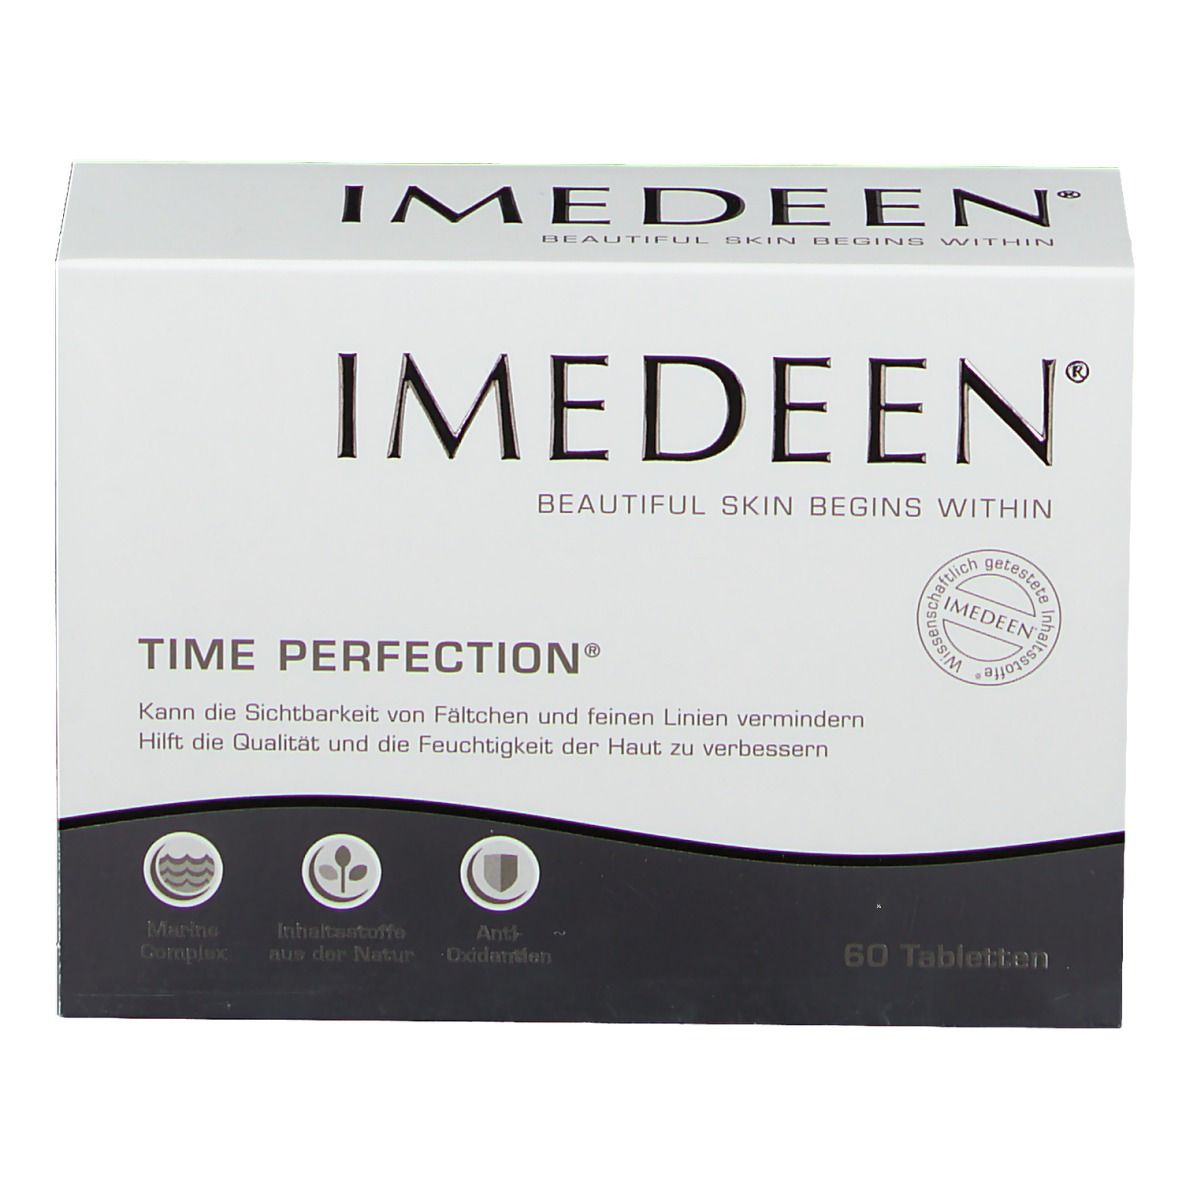 IMEDEEN® time perfection